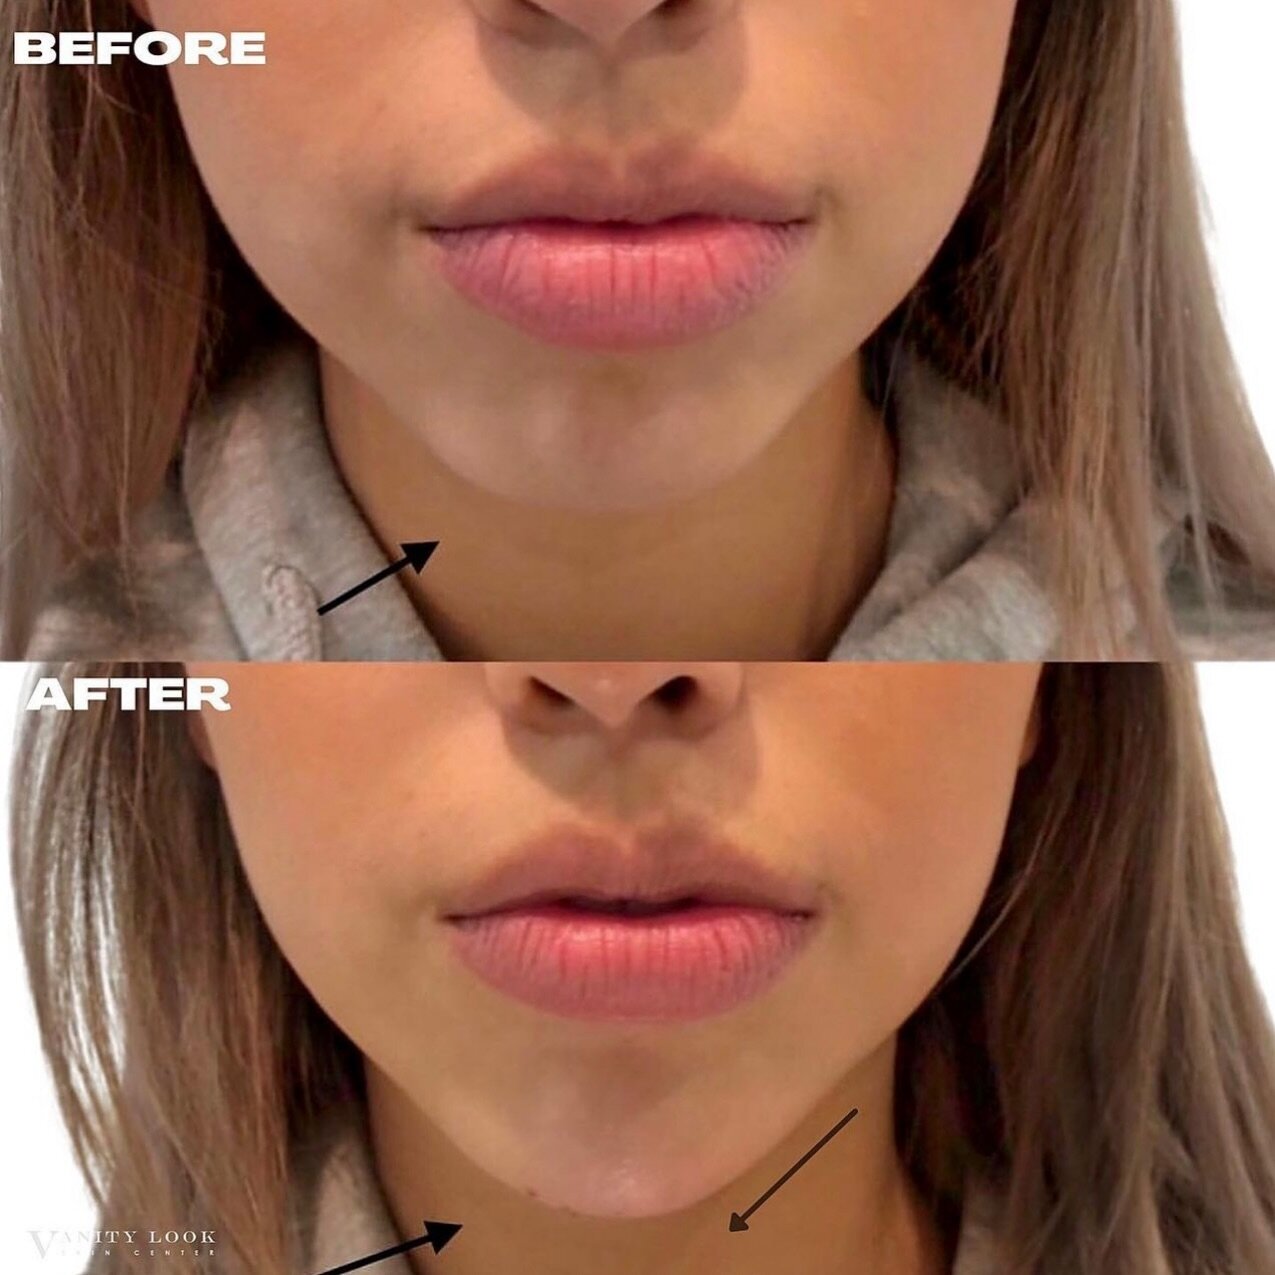 CHIN FILLER! 💉✨ Enhance your facial symmetry and contour with this treatment! 

Schedule your appointment today by calling (818) 290-3938.

Services we offer:
▪️ Fillers
▪️ Anti-aging treatments
▪️ Facial Balancing
▪️ Laser Hair Removal
▪️ Skin Reju